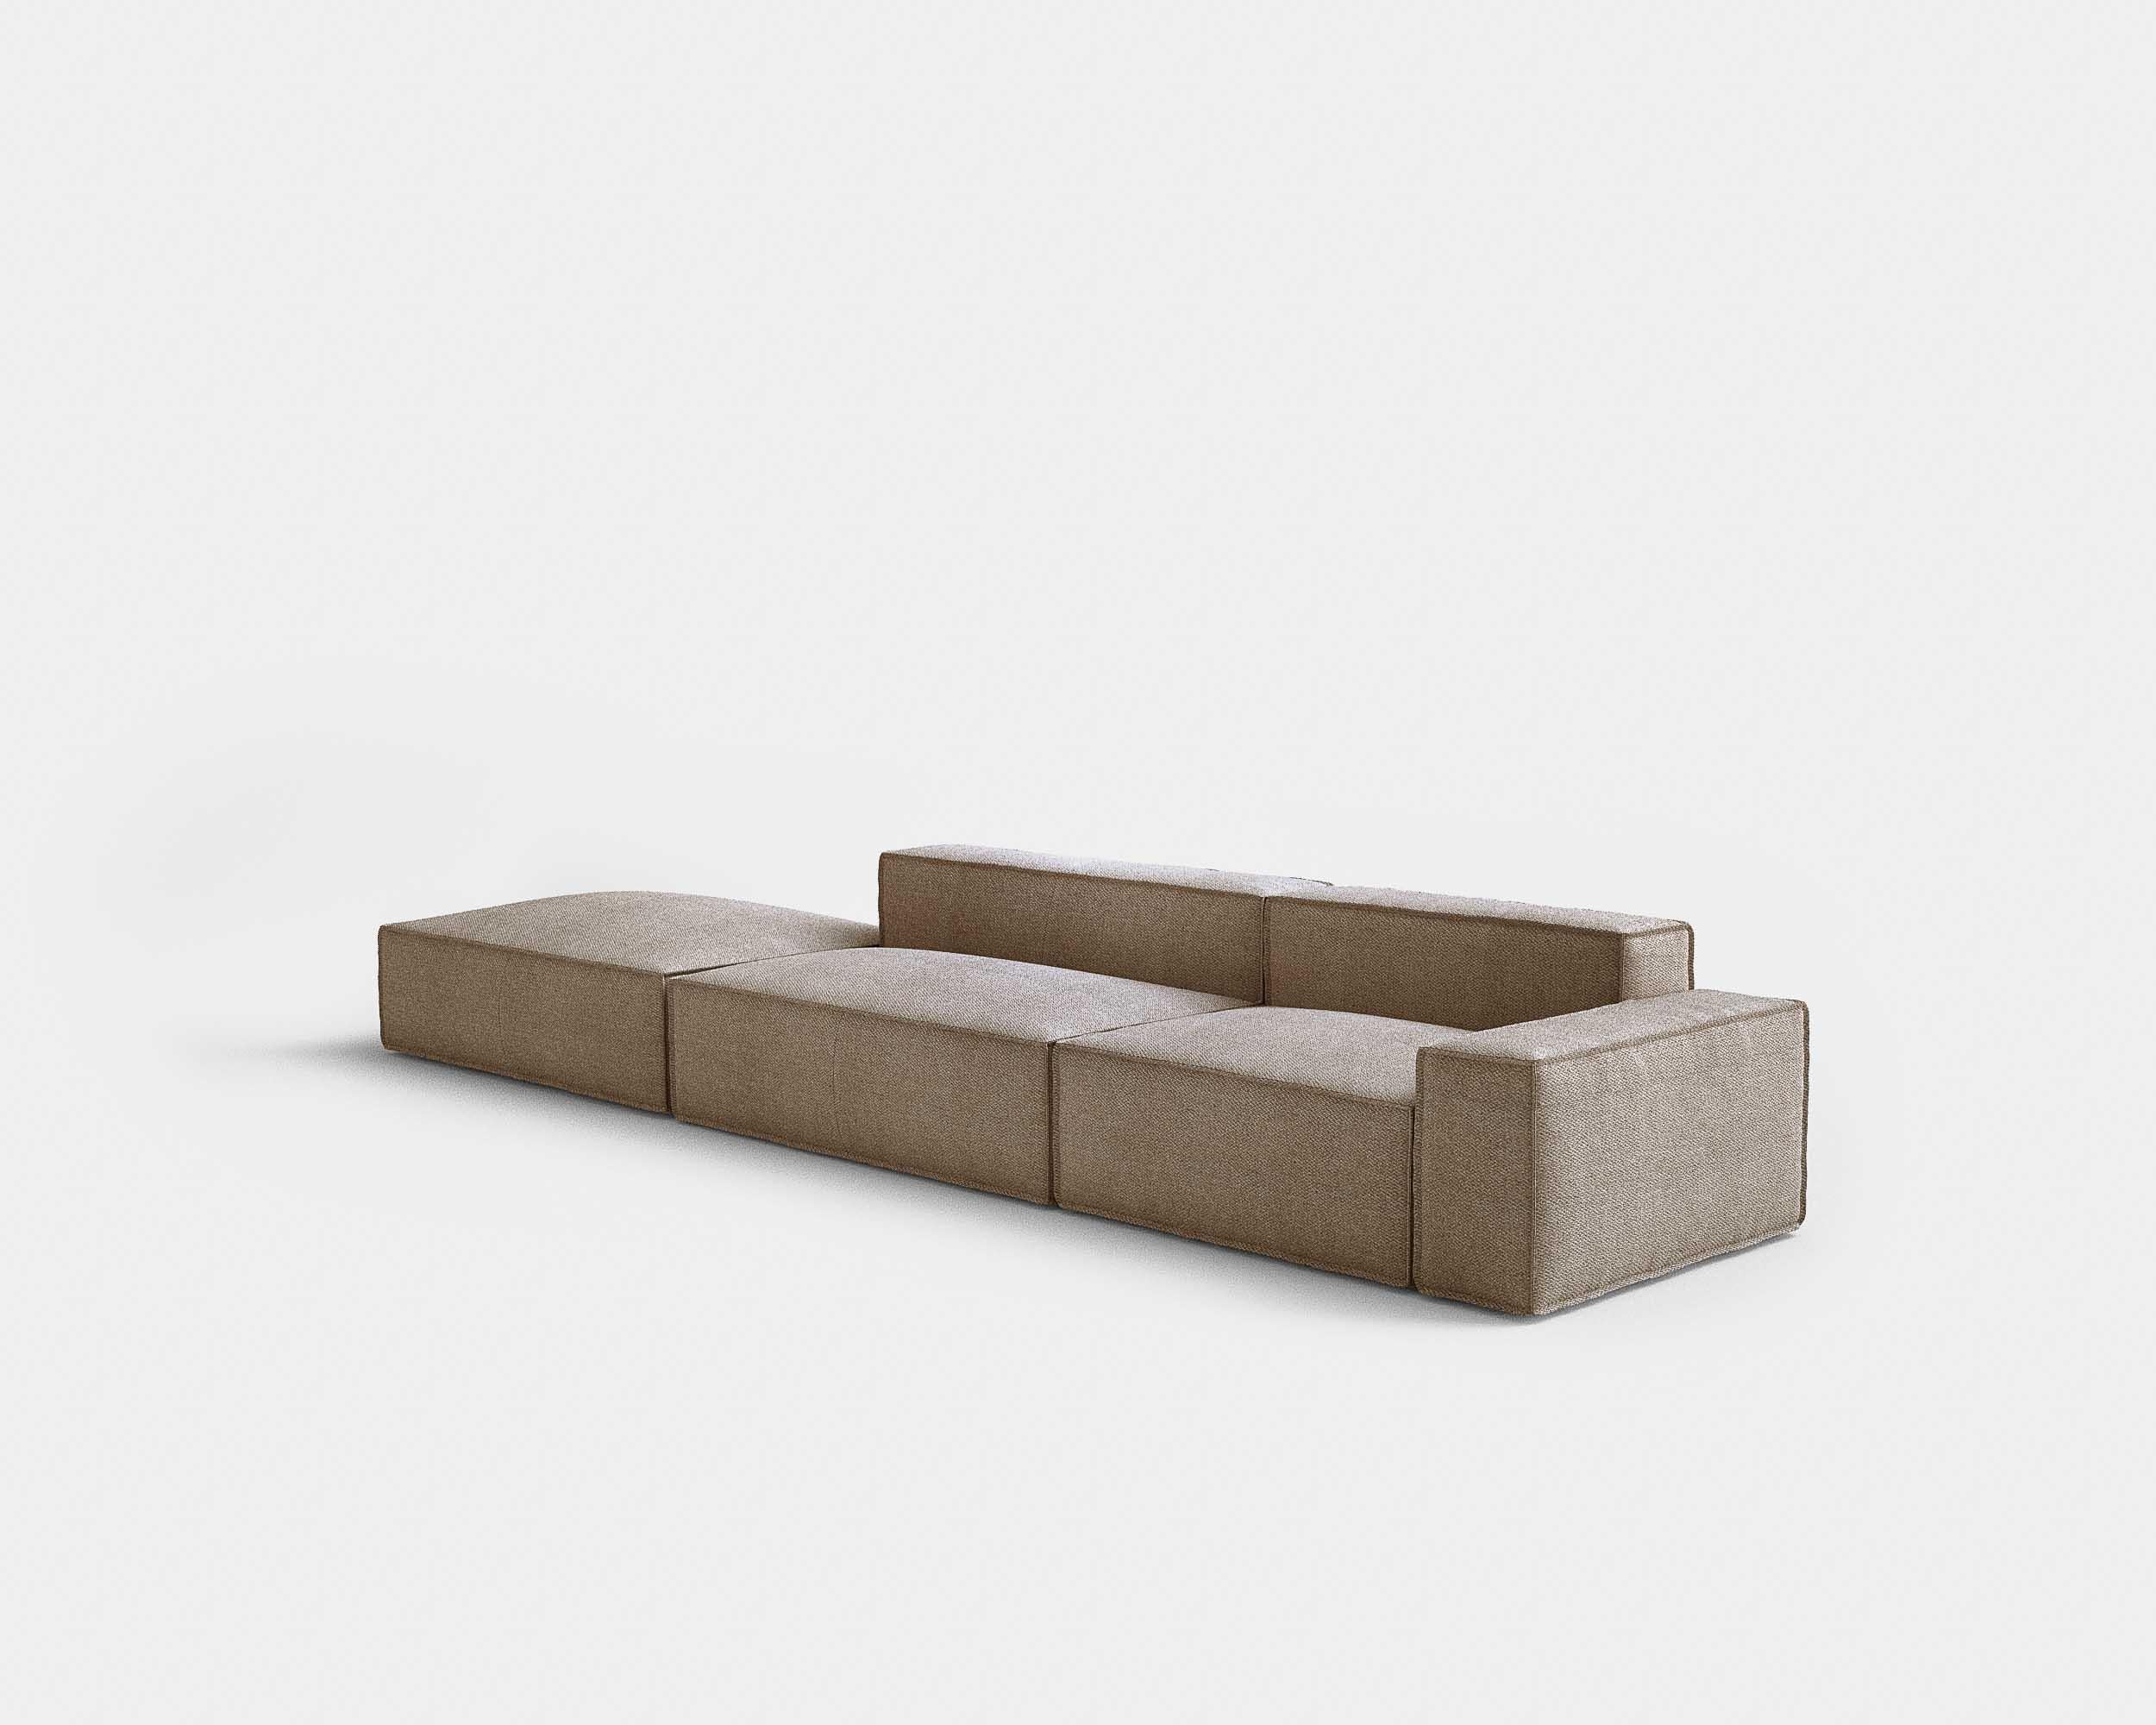 Davis Sofa by Amura Lab
Configuration: 012 + 023 + 005

Dimensions: H. 67 x 410 x 100 cm

Fabric reference in picture : Brera 850 - Brown 04
(Non-contractual fabric rendering)

More modules available in different fabrics and colors
 
“A